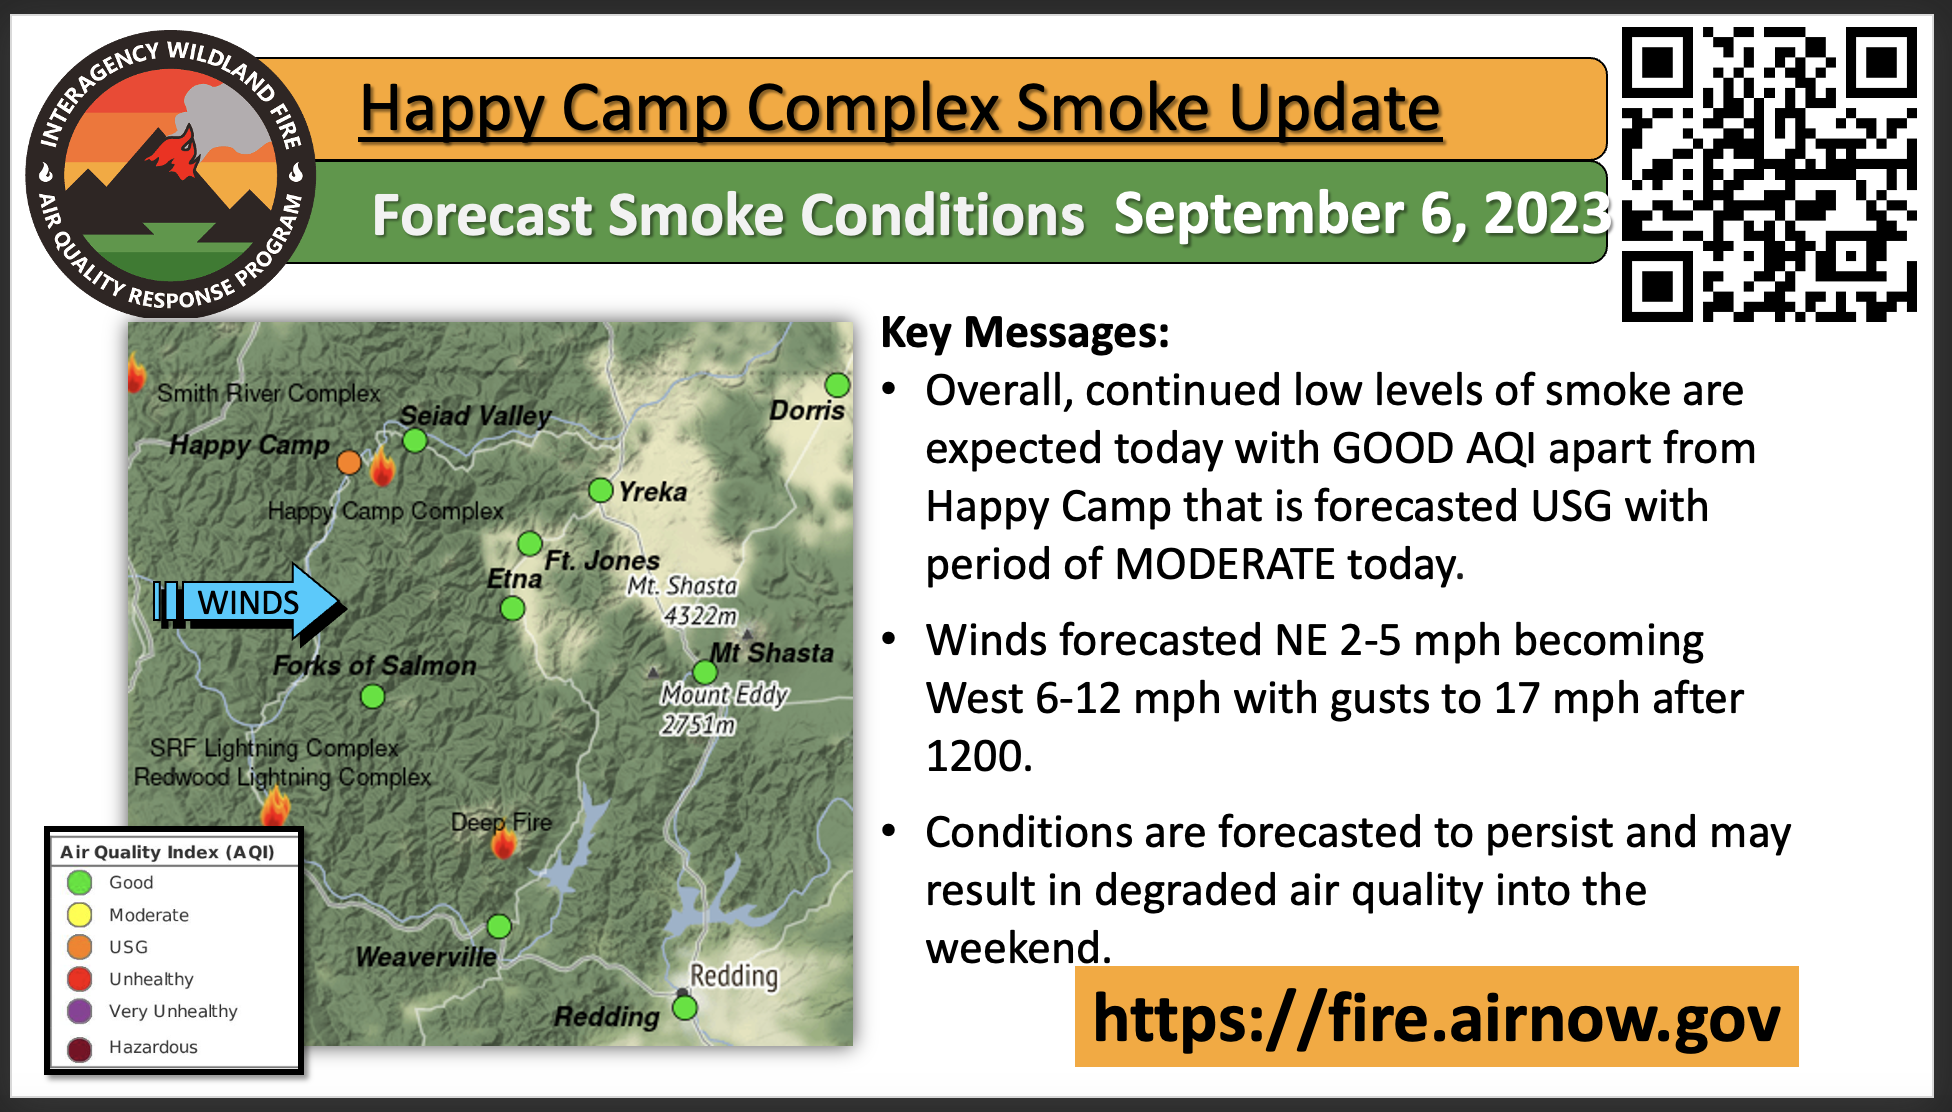 Image of the Smoke Update with QR code linking to the full Smoke Outlook report for September 6, 2023.